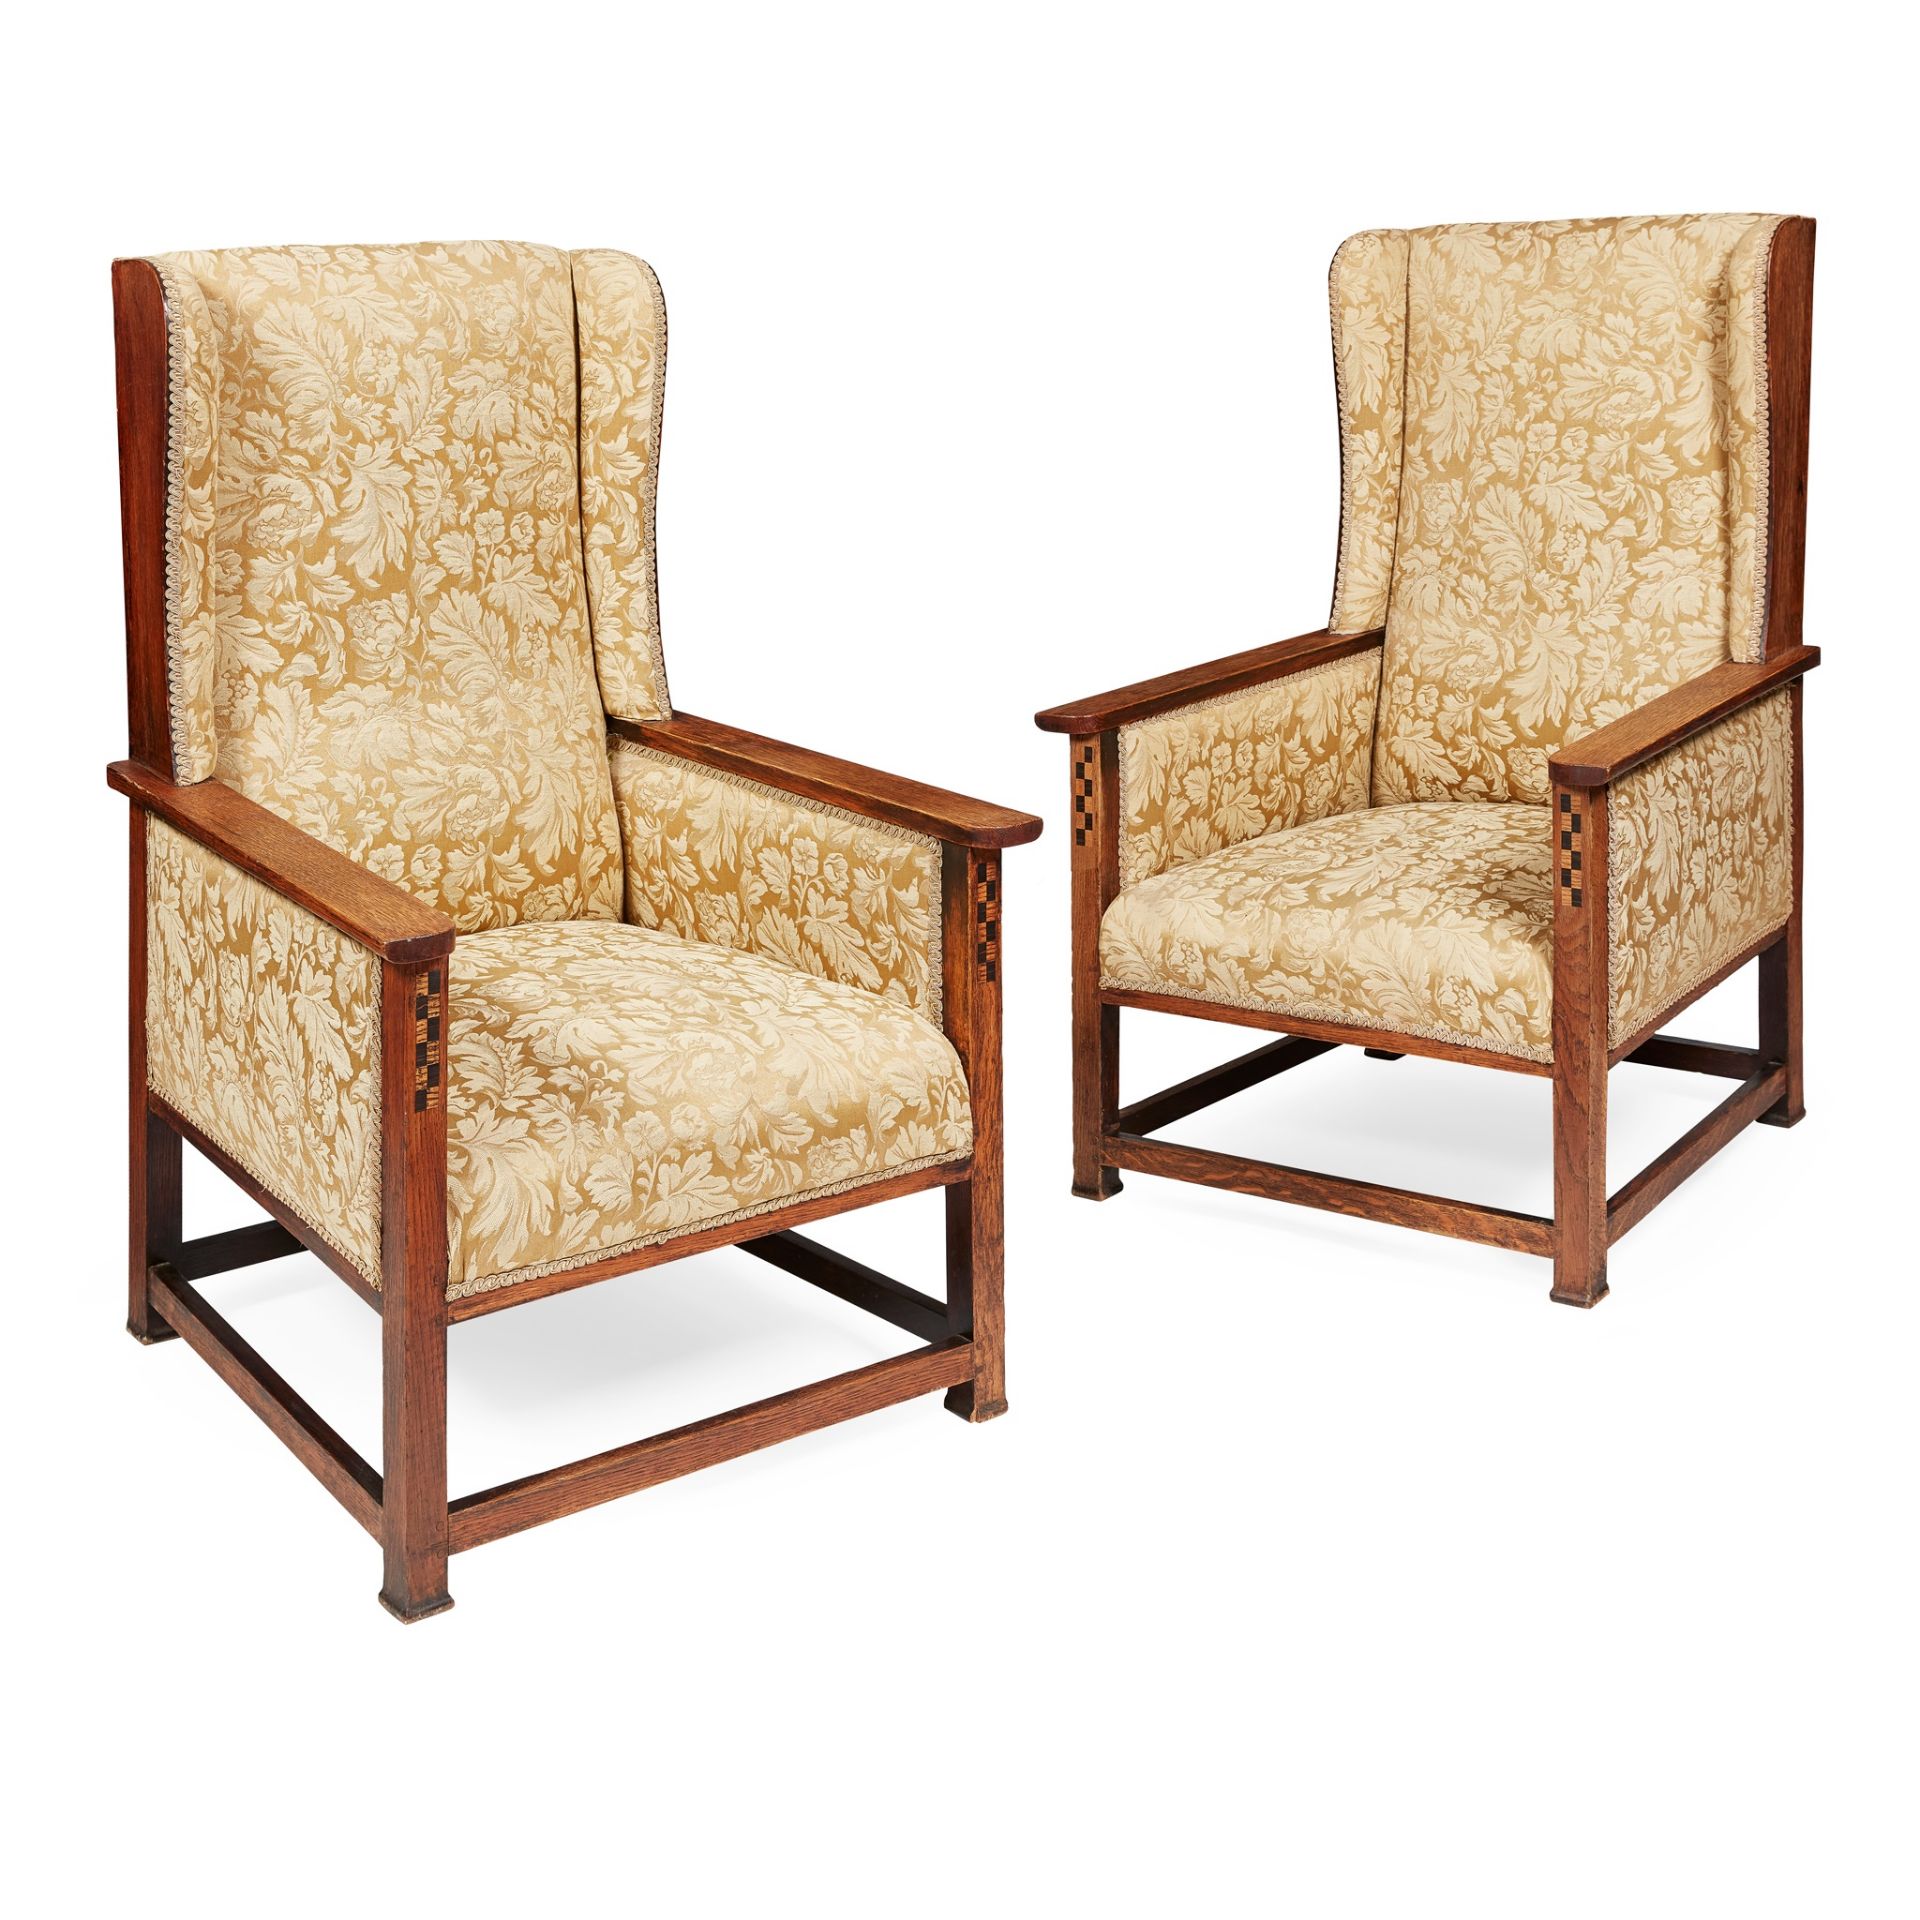 WILLIAM SKULL, HIGH WYCOMBE, AFTER M. H. BAILLIE SCOTT PAIR OF ARTS & CRAFTS WING ARMCHAIRS, CIRCA